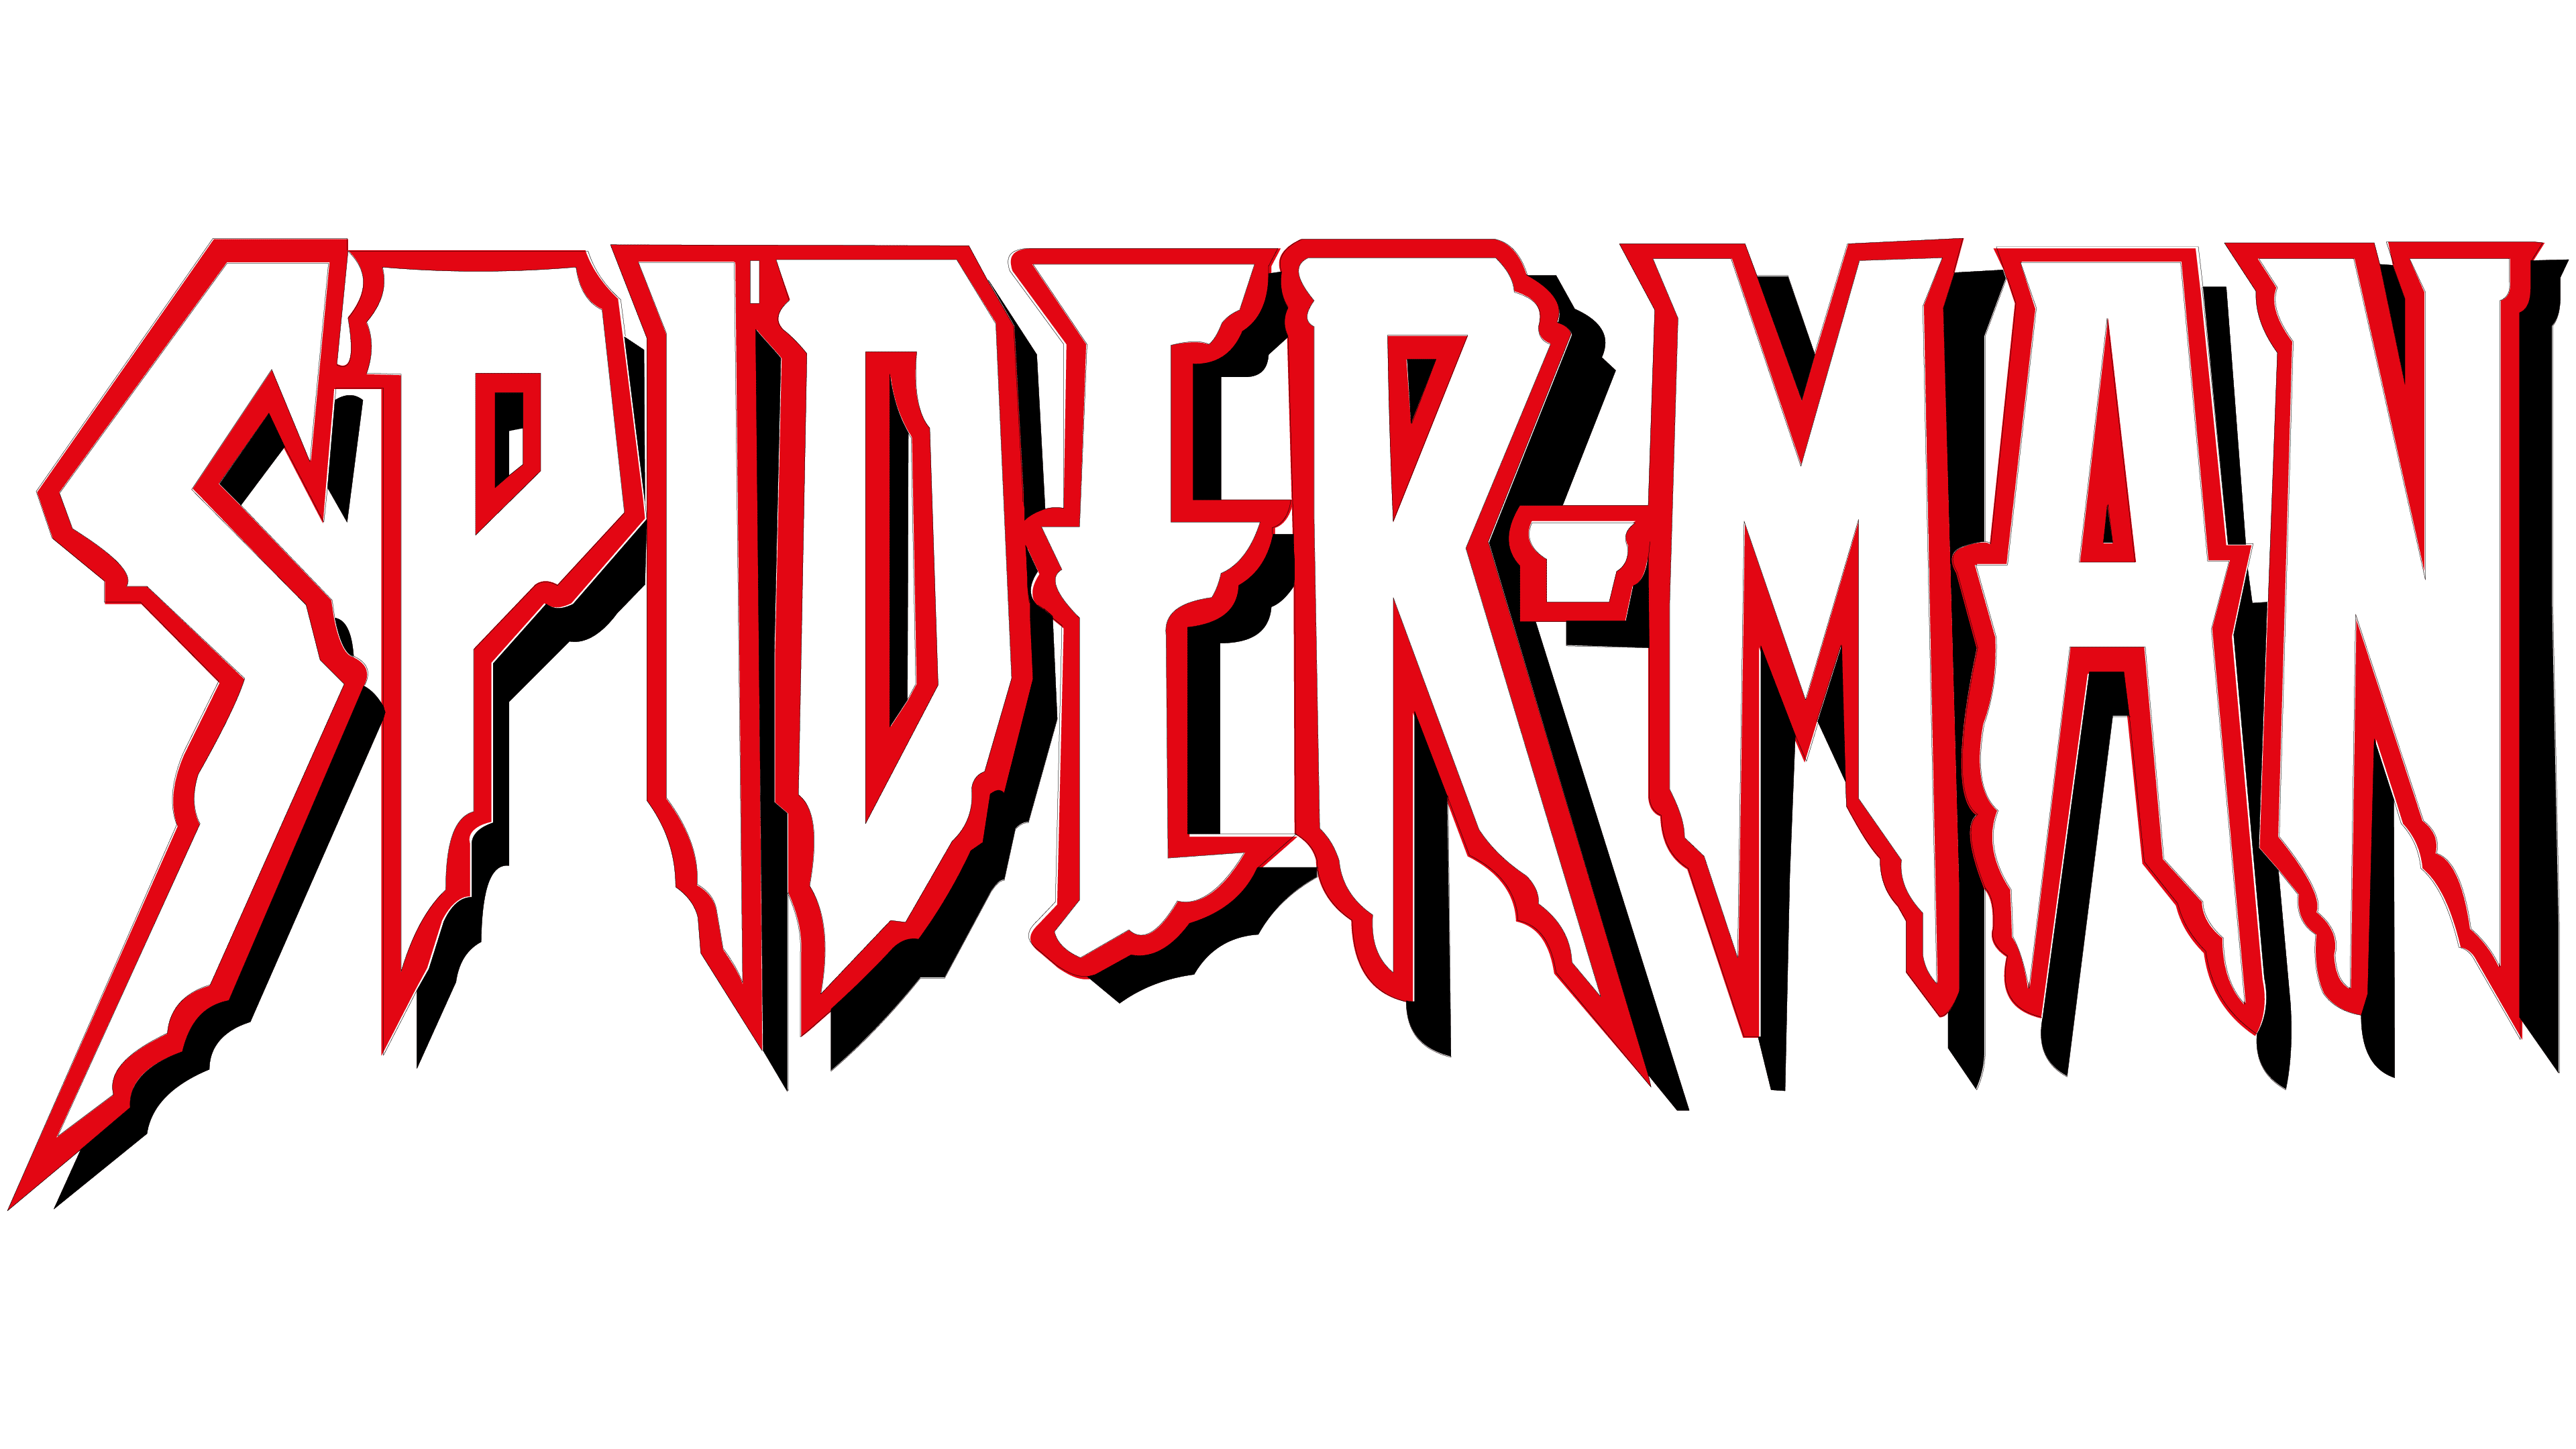 Download Custom Made Spiderman Logo 1 By Jmk, Prime On Deviant - Spider Man  Logo Red PNG Image with No Background - PNGkey.com